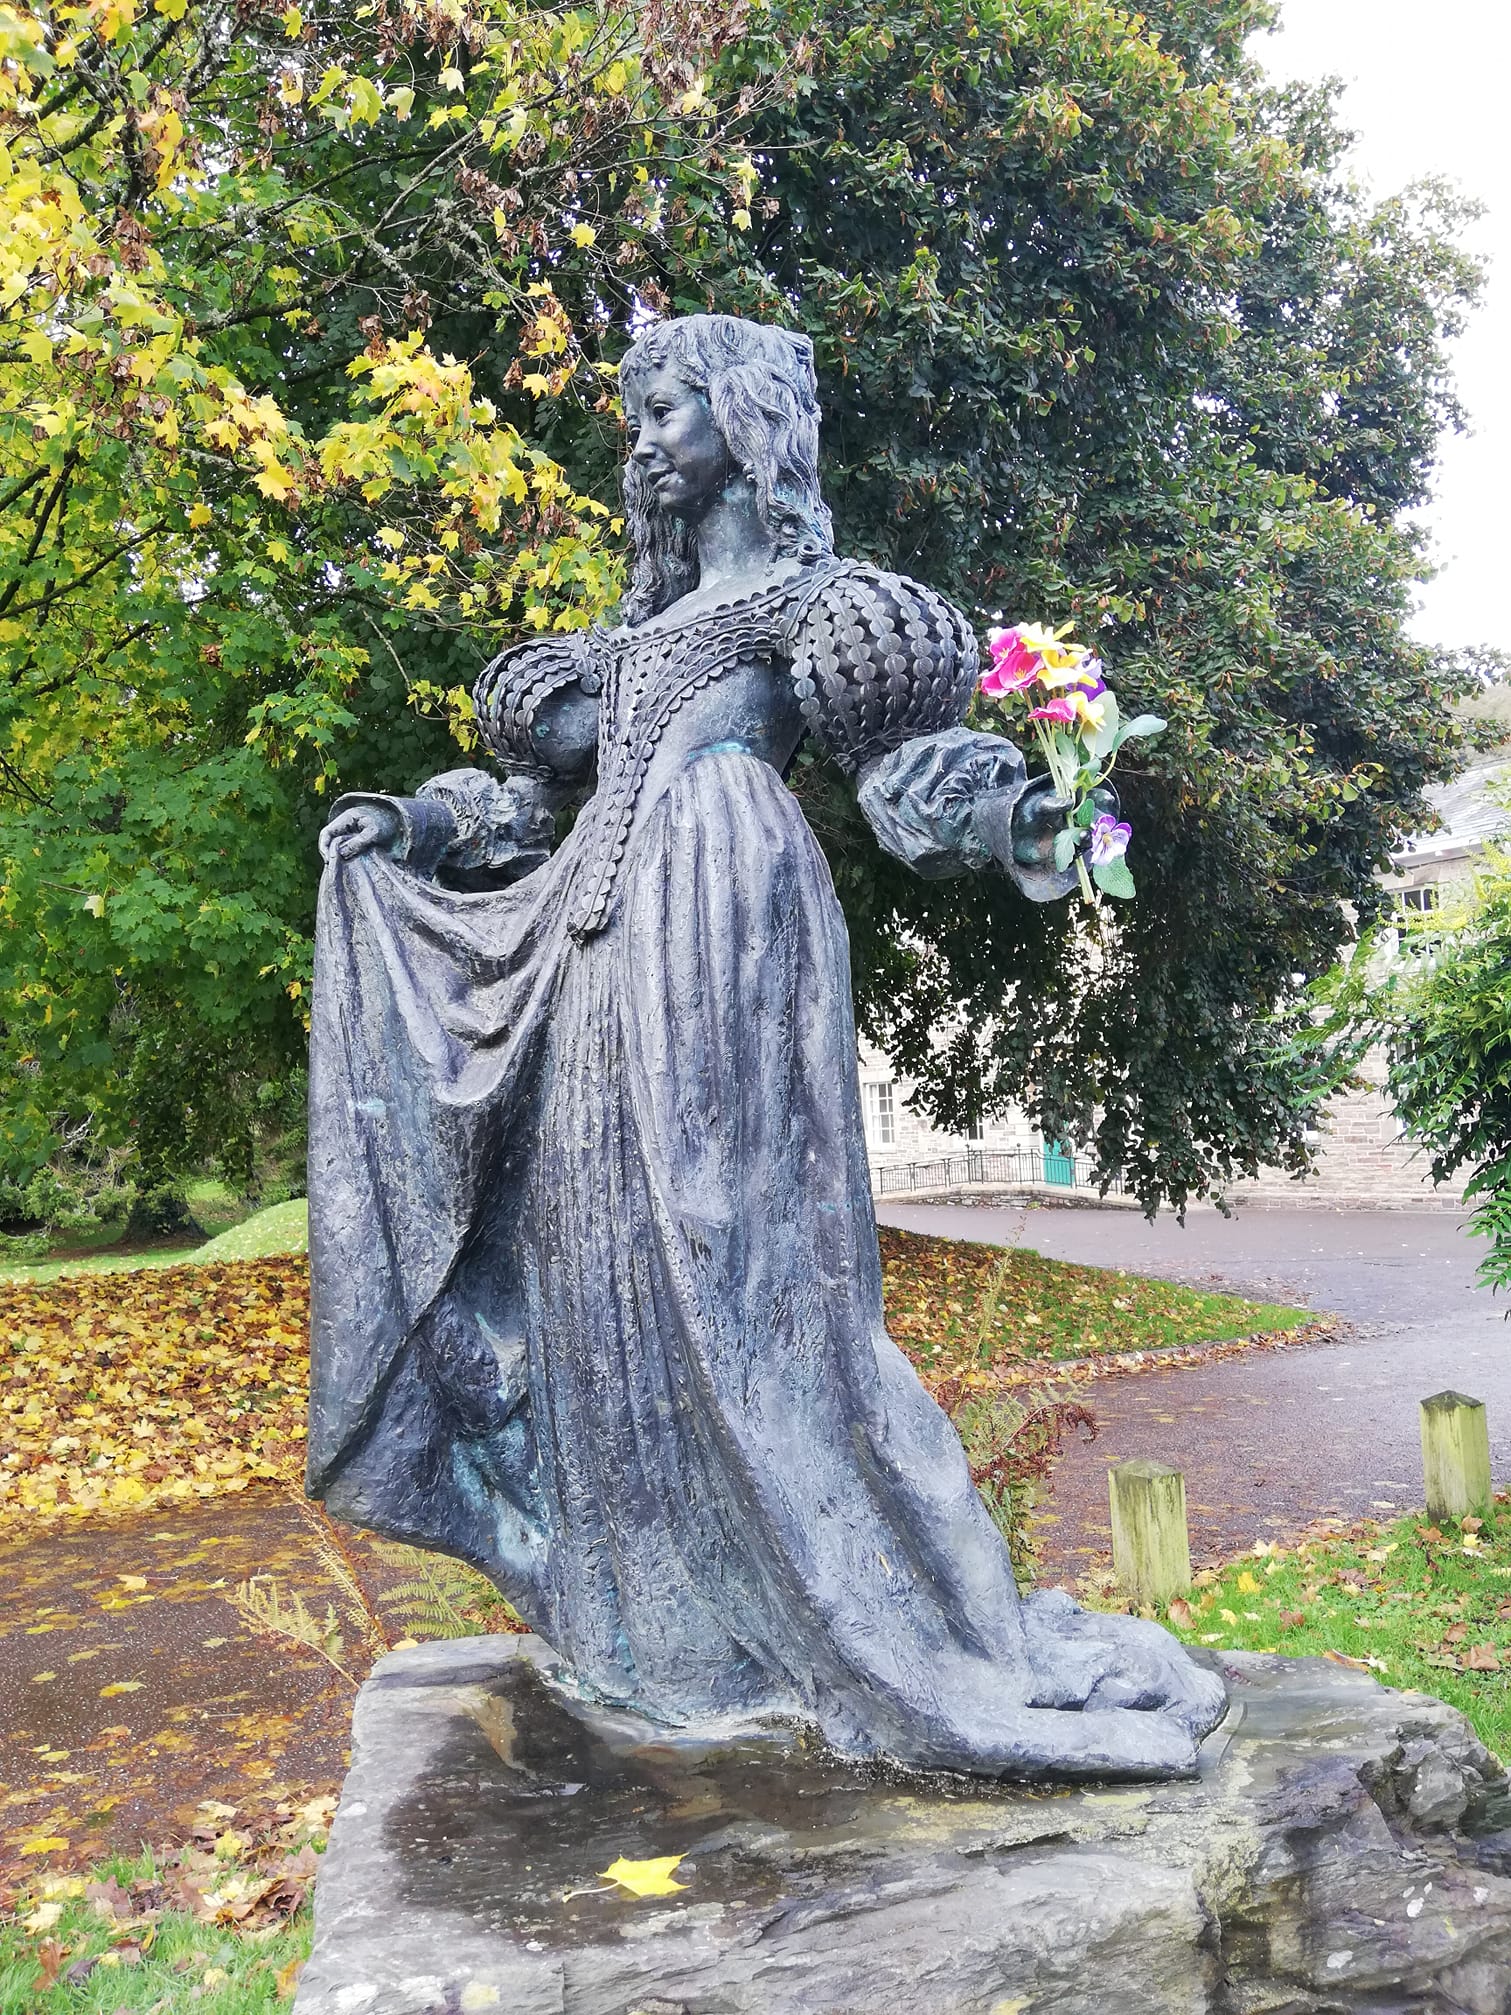 Lorna Doone Statue (bronze statue of a 17th century heroine) with flowers in her hand